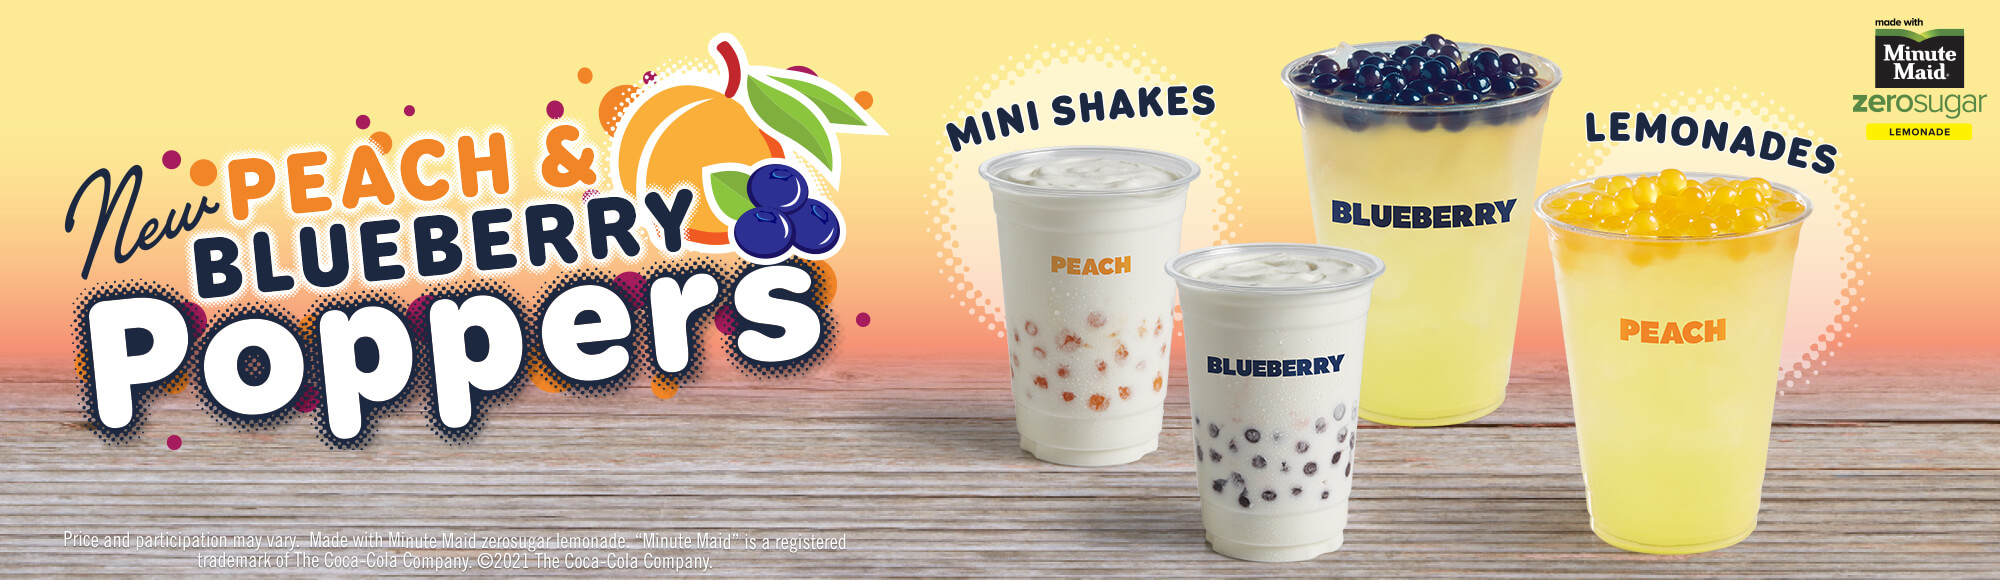 New Peach and Bluebery Poppers. Try them on our Mini Shakes and Lemonades.